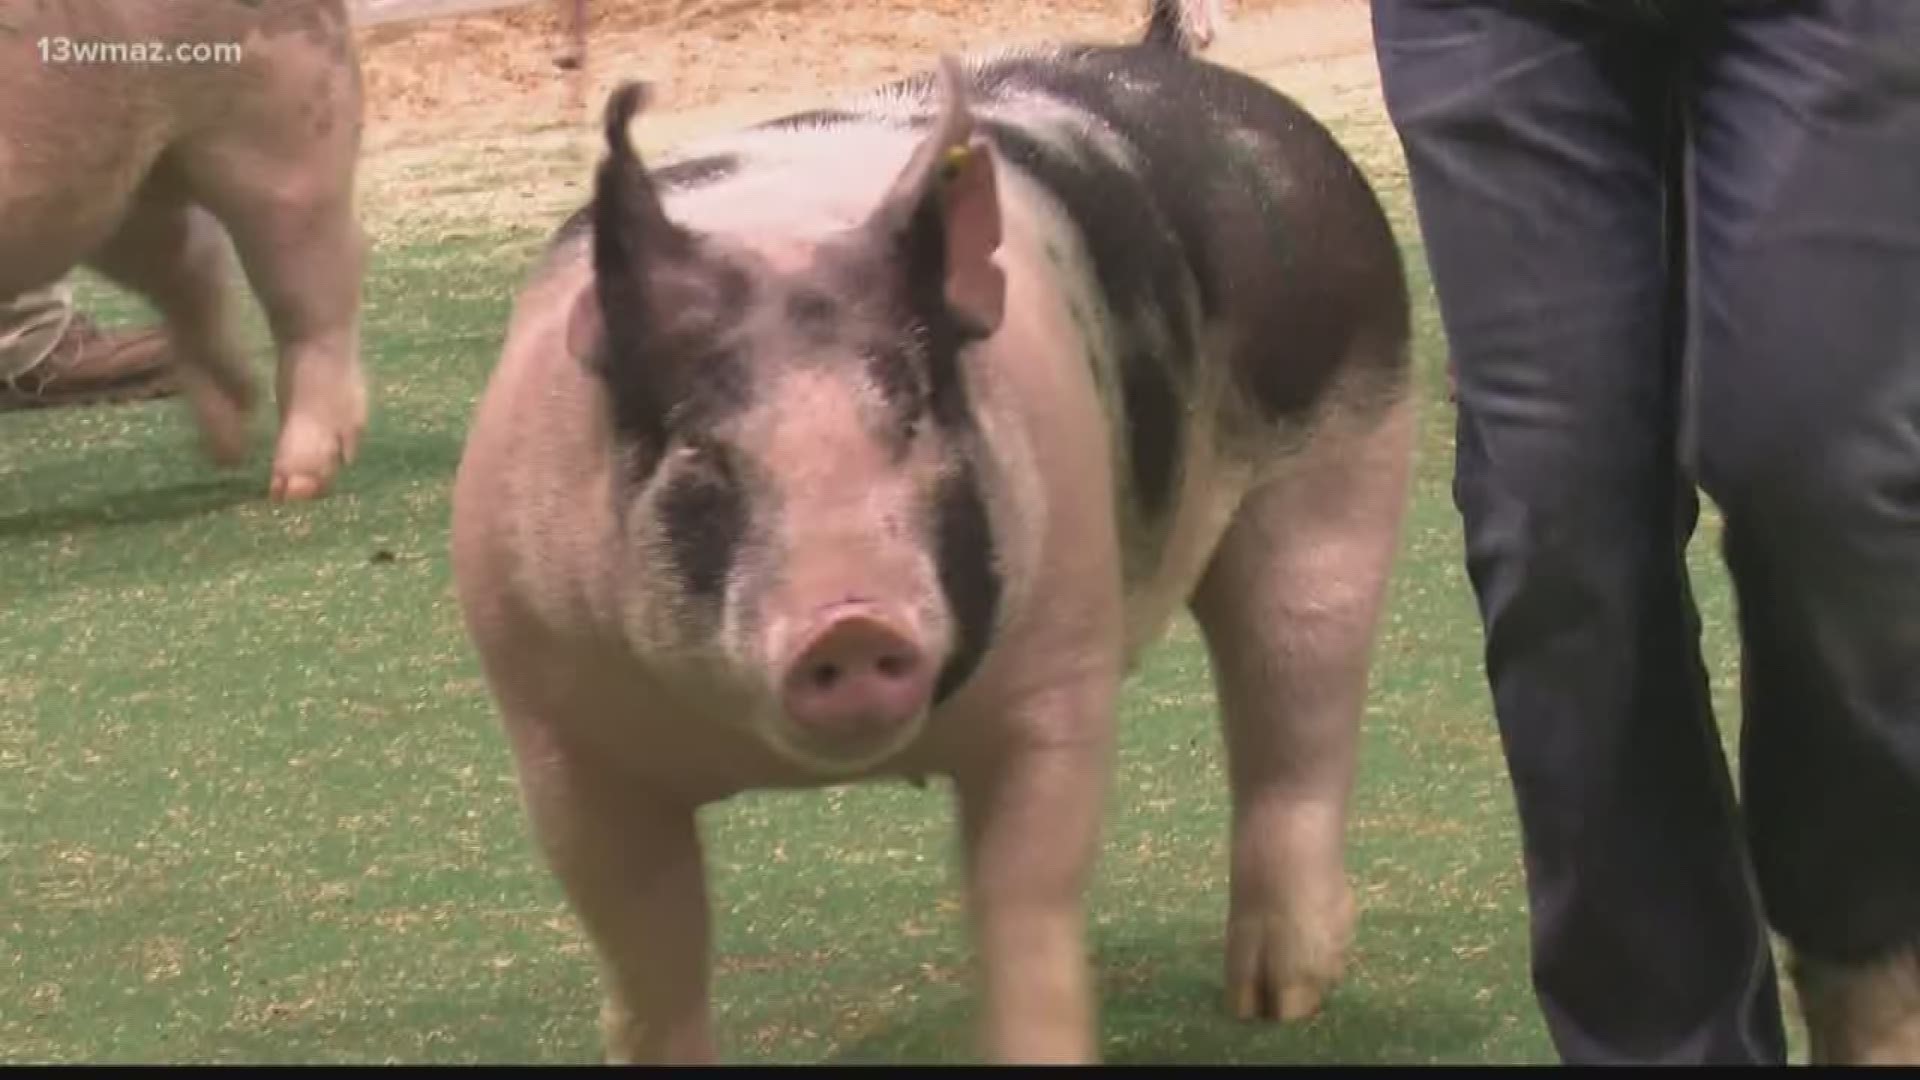 The National Swine Registry held their annual show Saturday, and more than 1,200 live swine were shown off at the event.